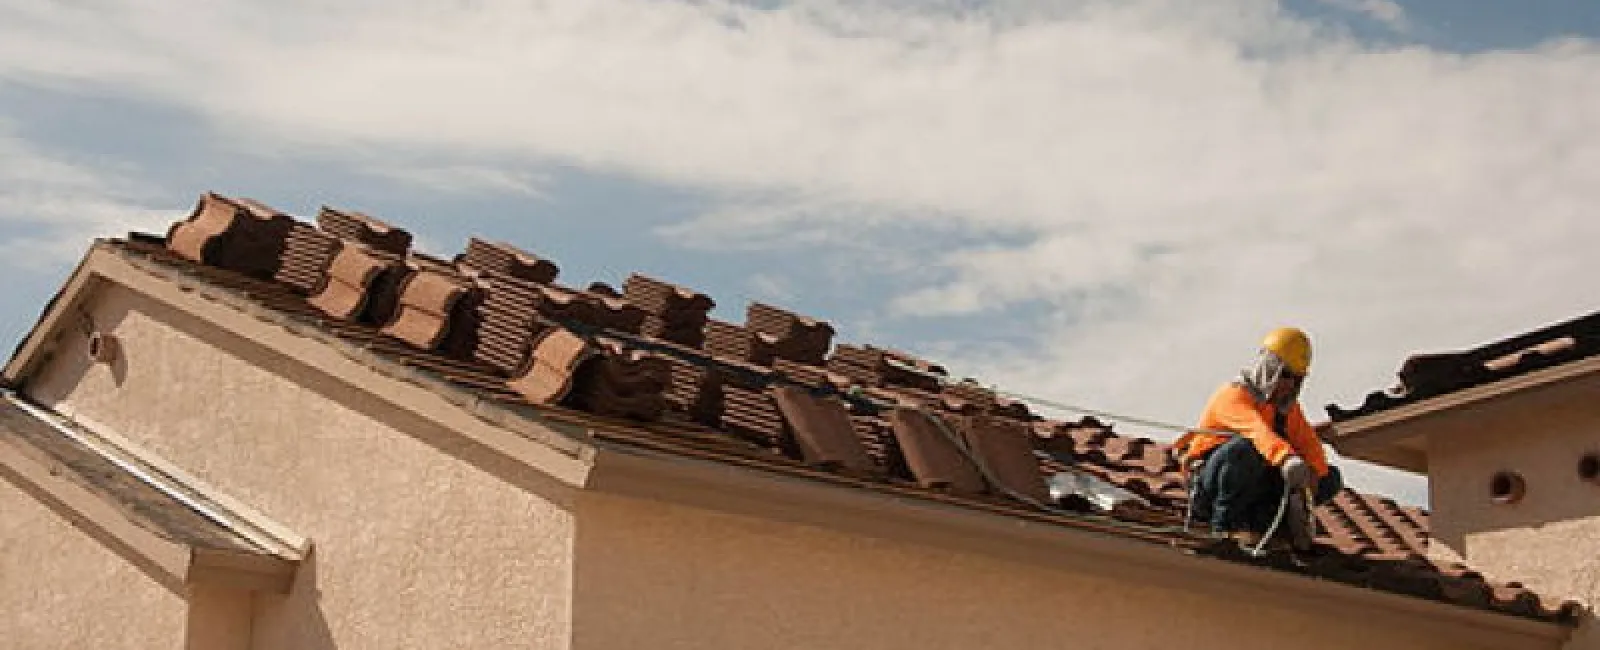 Should roofing felt be installed underneath your home’s shingles?